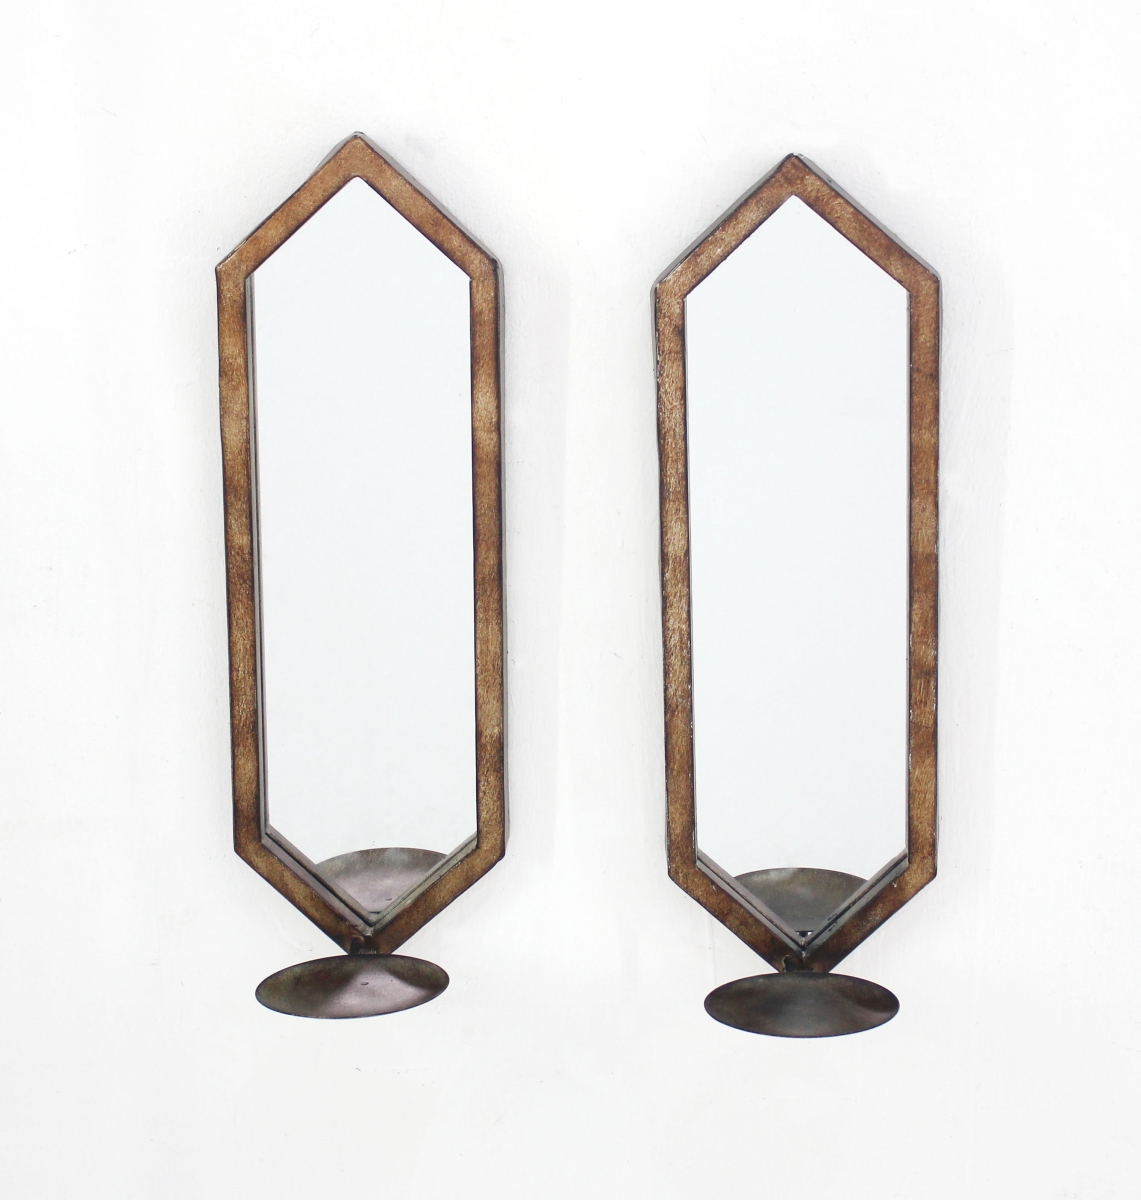 Home Roots 274479 Minimalist Mirrored Wall Candle Holder Sconce Set